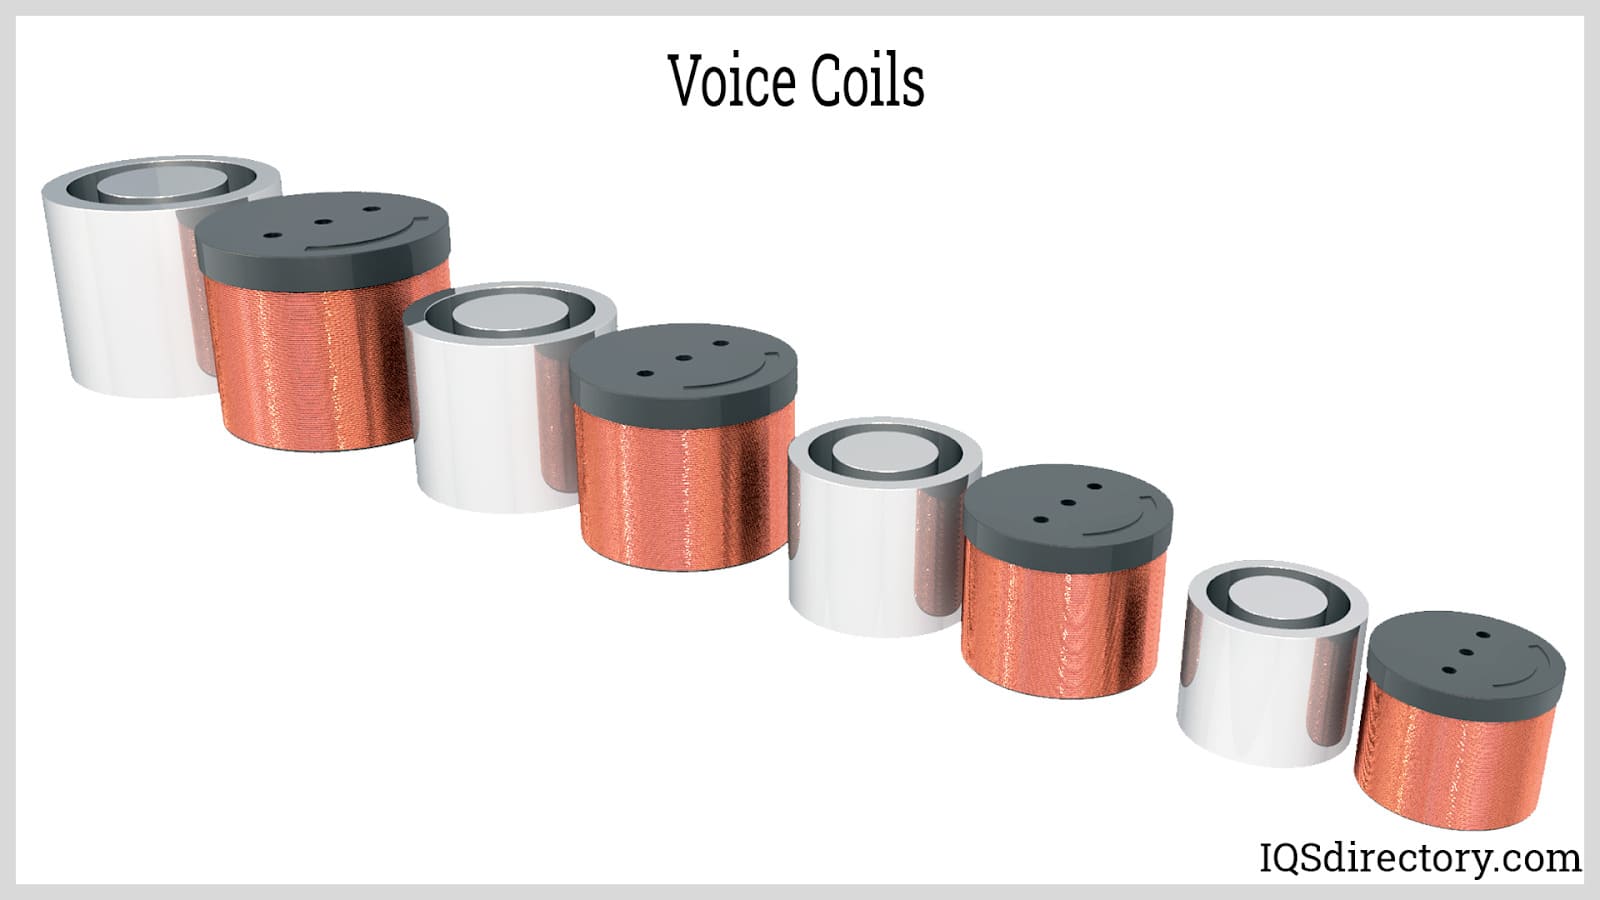 https://www.iqsdirectory.com/articles/electric-coil/voice-coils/voice-coils.jpg